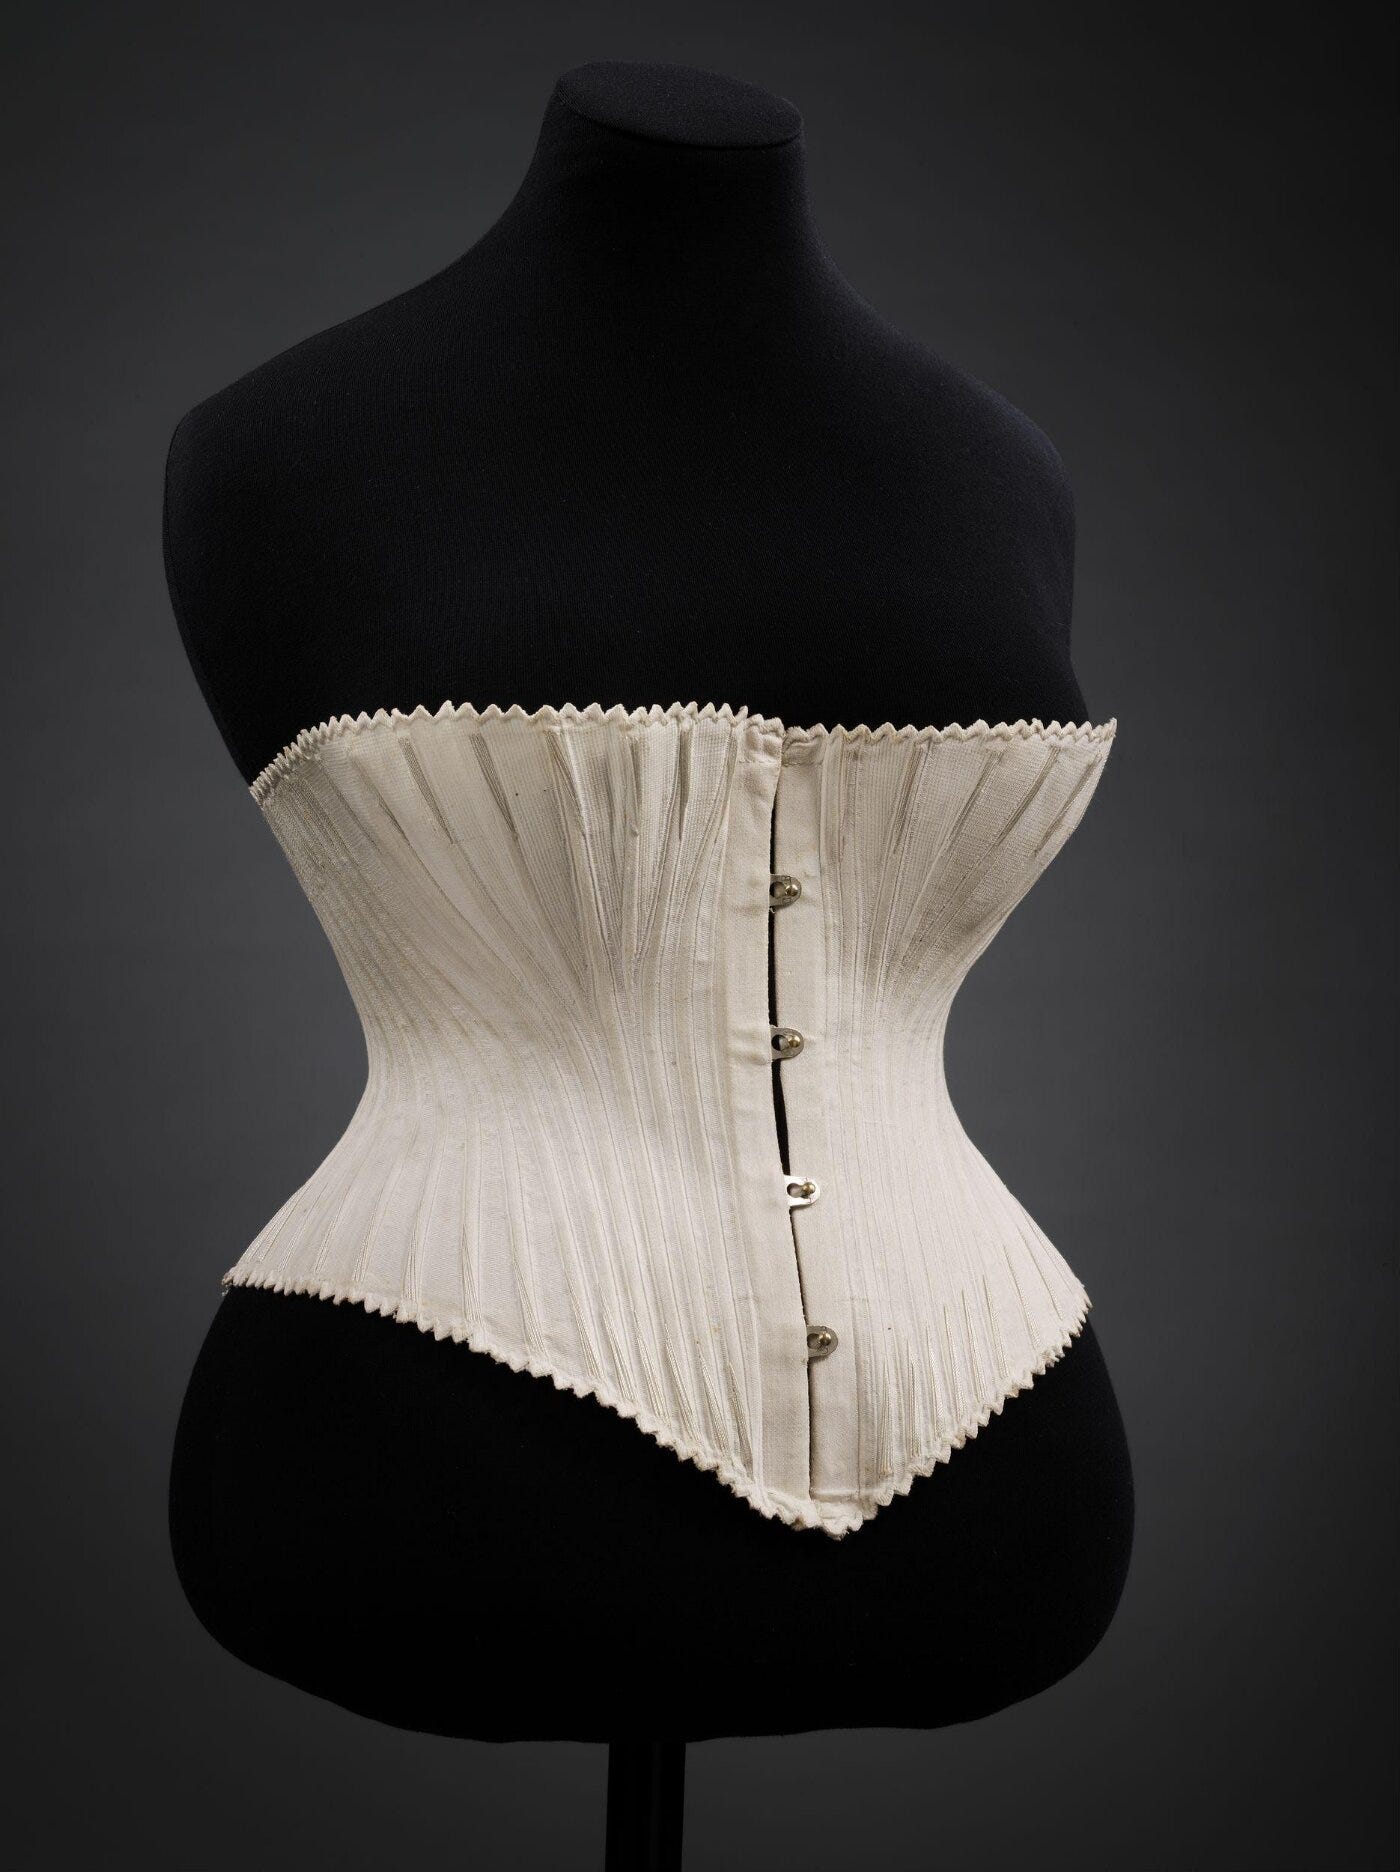 Waist Trainers and The Controversial Revival of the Corset